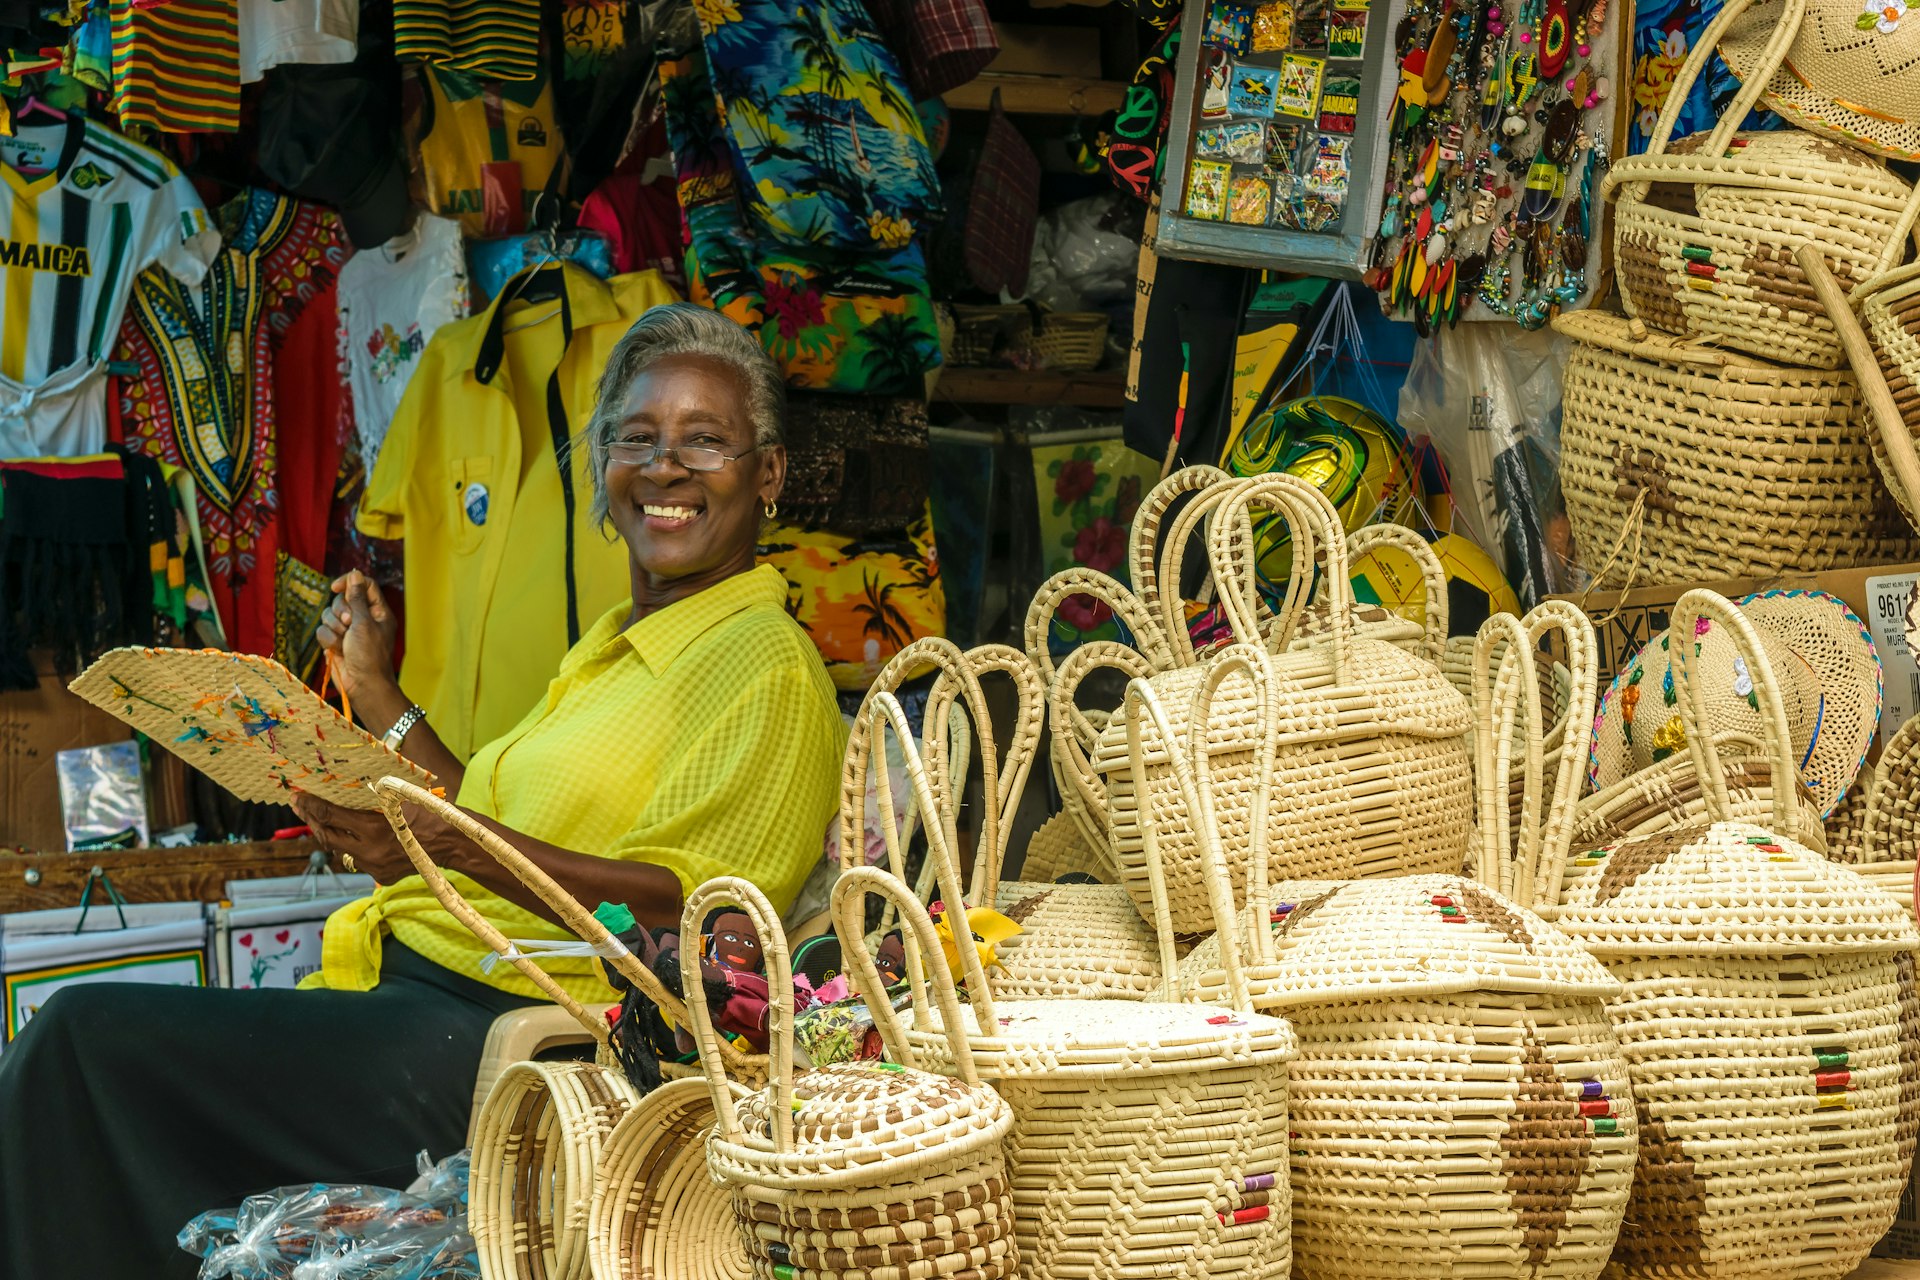 A woman smiles as she weaves baskets at her vendor stall in Montego Bay, Jamaica